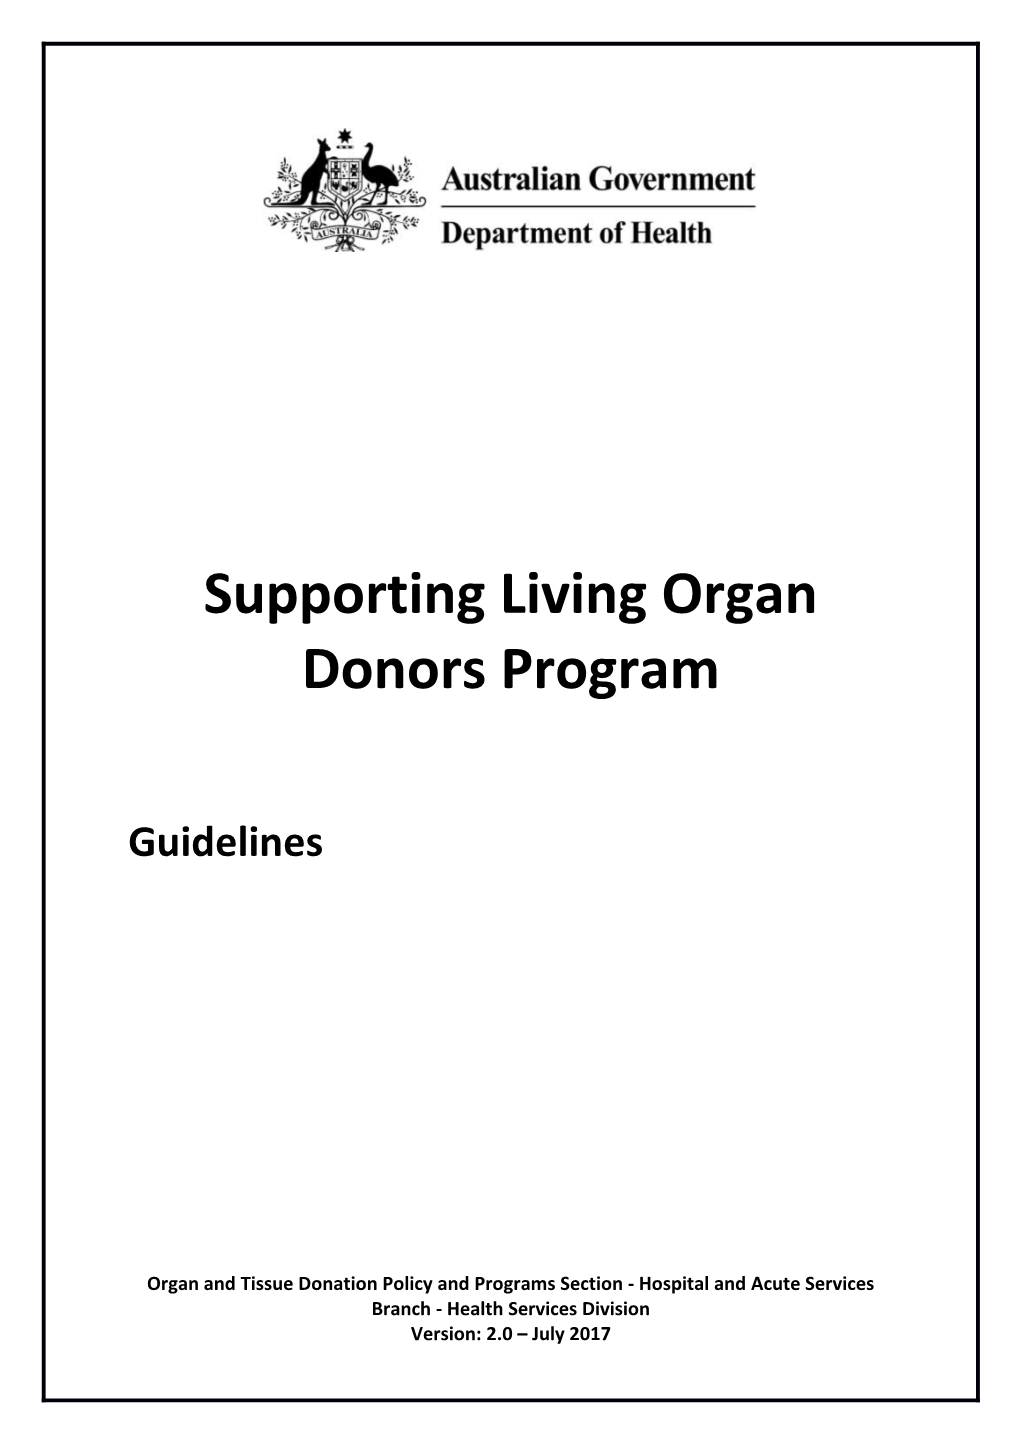 Supporting Living Organ Donors Program